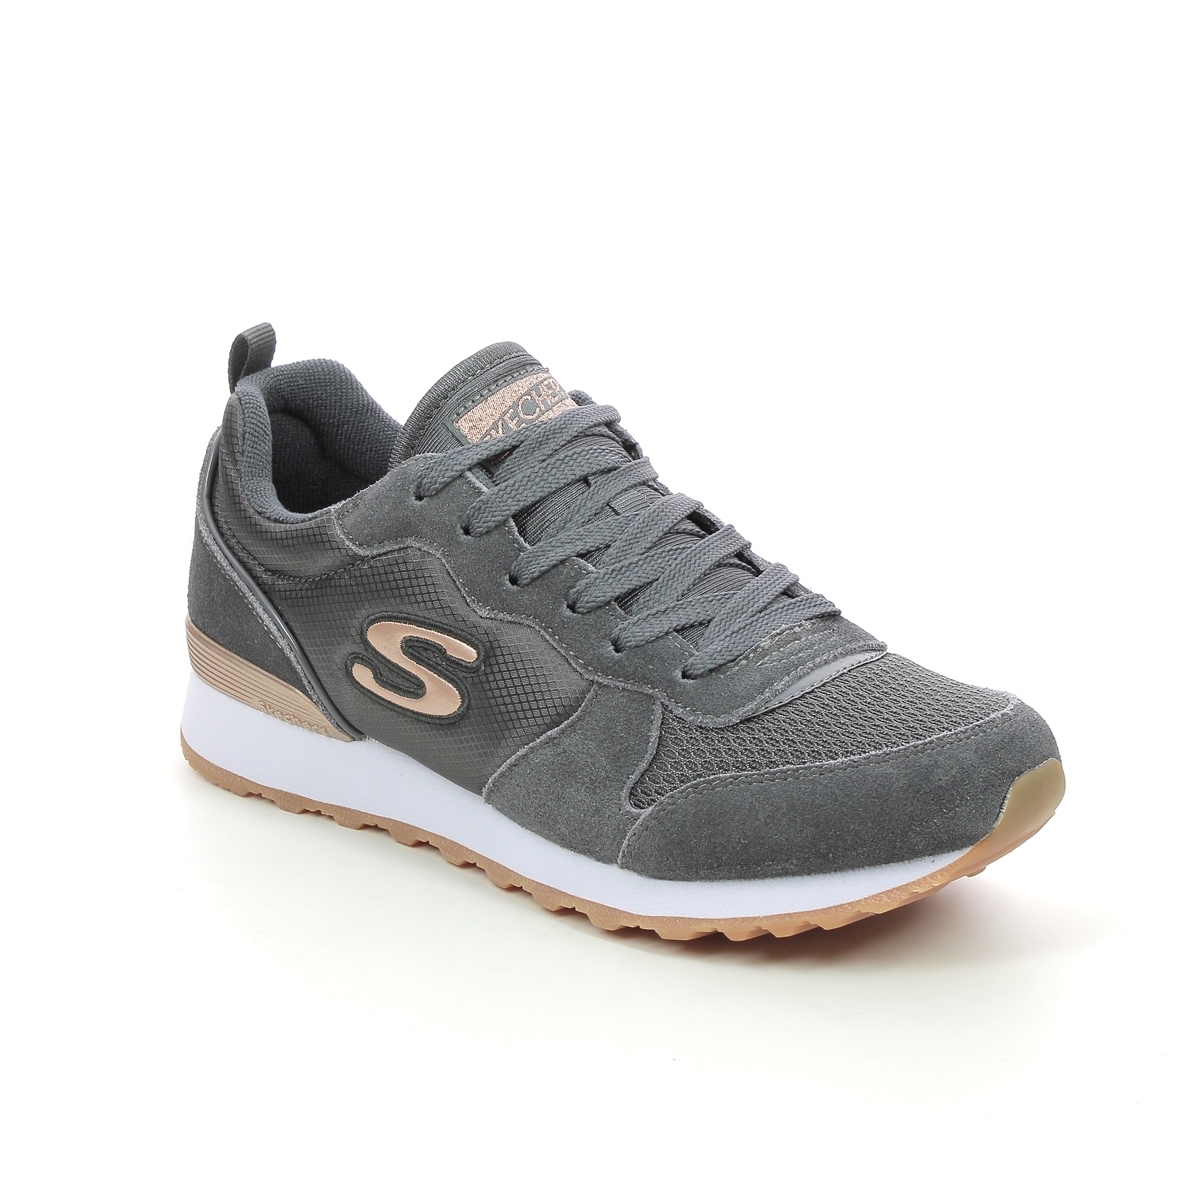 Skechers Og 85 Gold Gurl CCL Charcoal Womens trainers 111